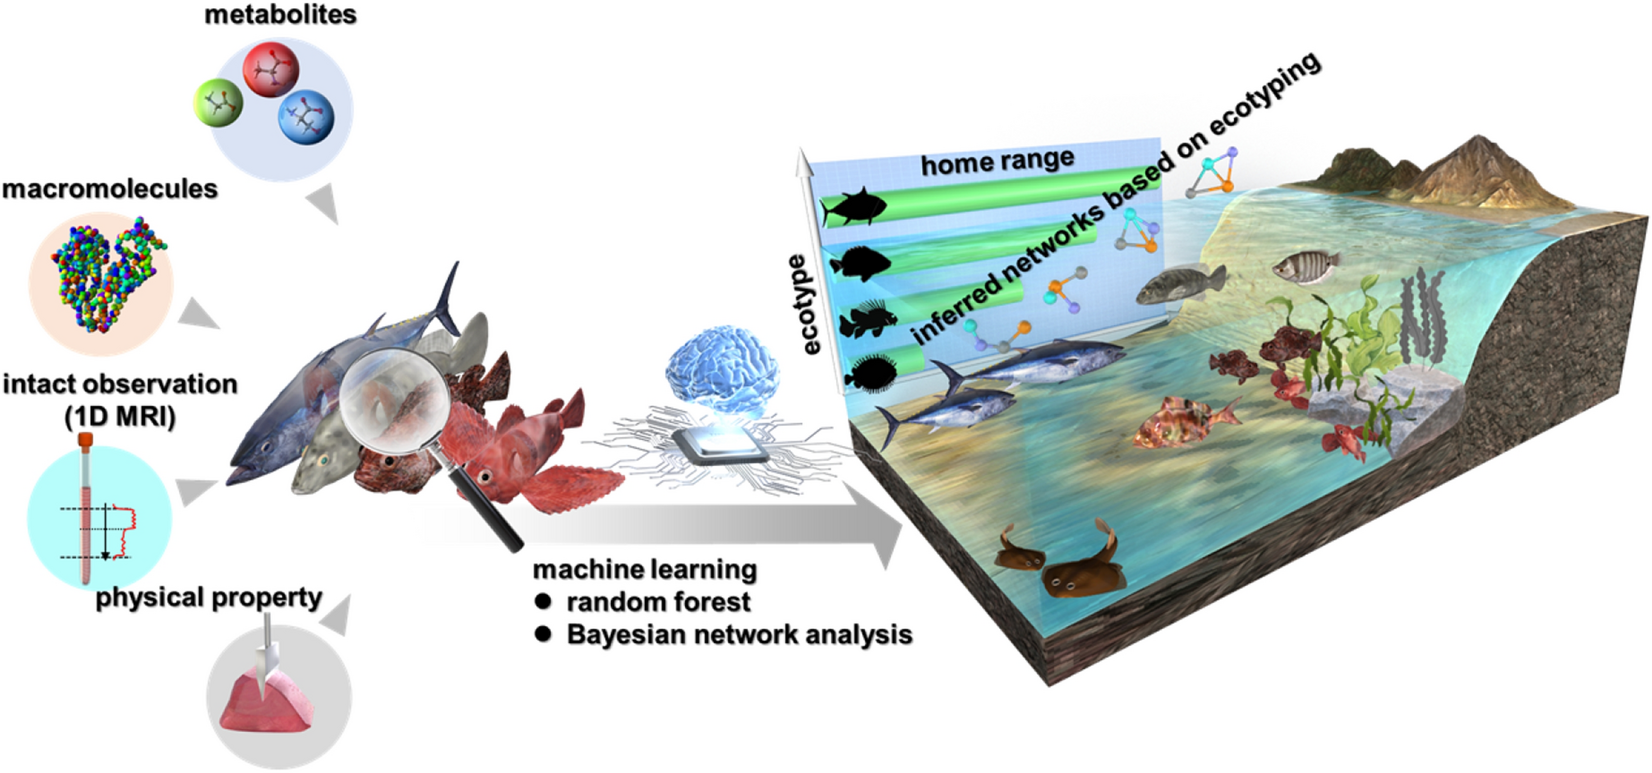 Fish ecotyping based on machine learning and inferred network analysis of  chemical and physical properties